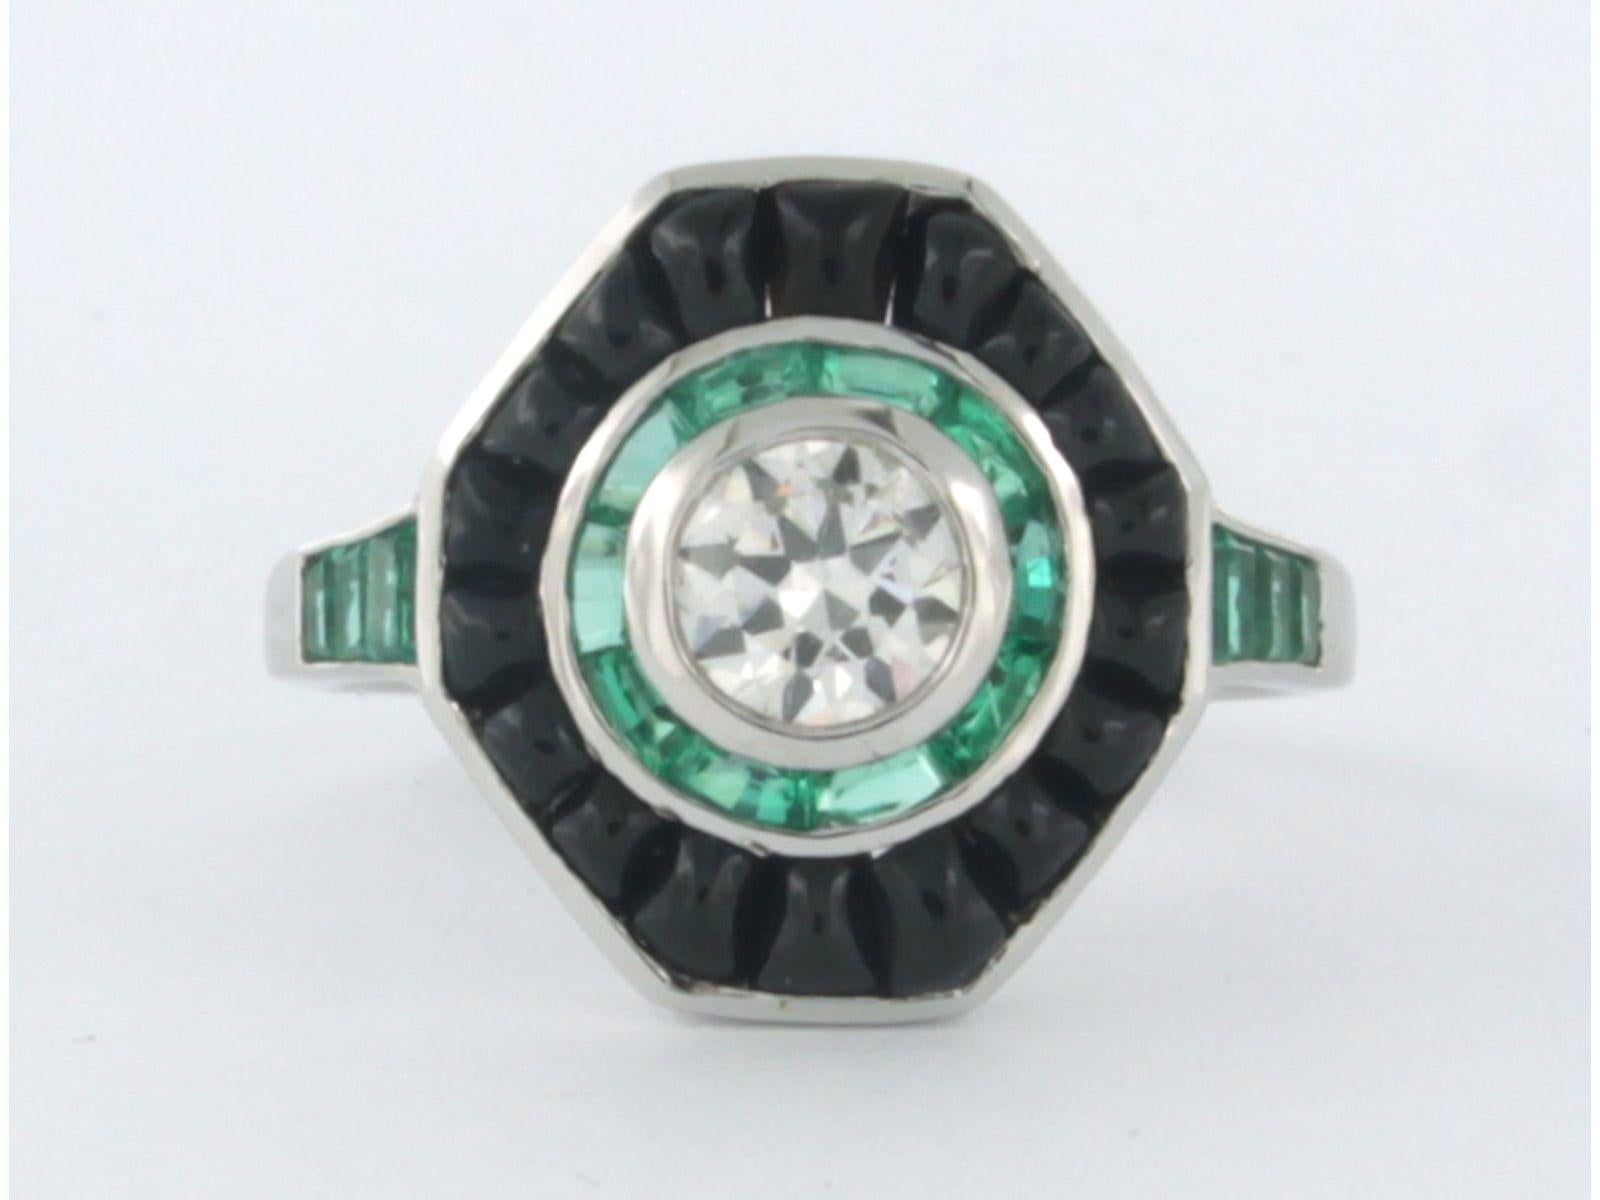 14k white gold ring set with an old Europian cut diamond in the center. 0.56ct - F/G - SI2 - and on entourage onyx and emerald - ring size U.S. 6.75 - EU. 17.25(54)

detailed description

the top of the ring is 1.5 cm wide

weight 3.2 grams

ring